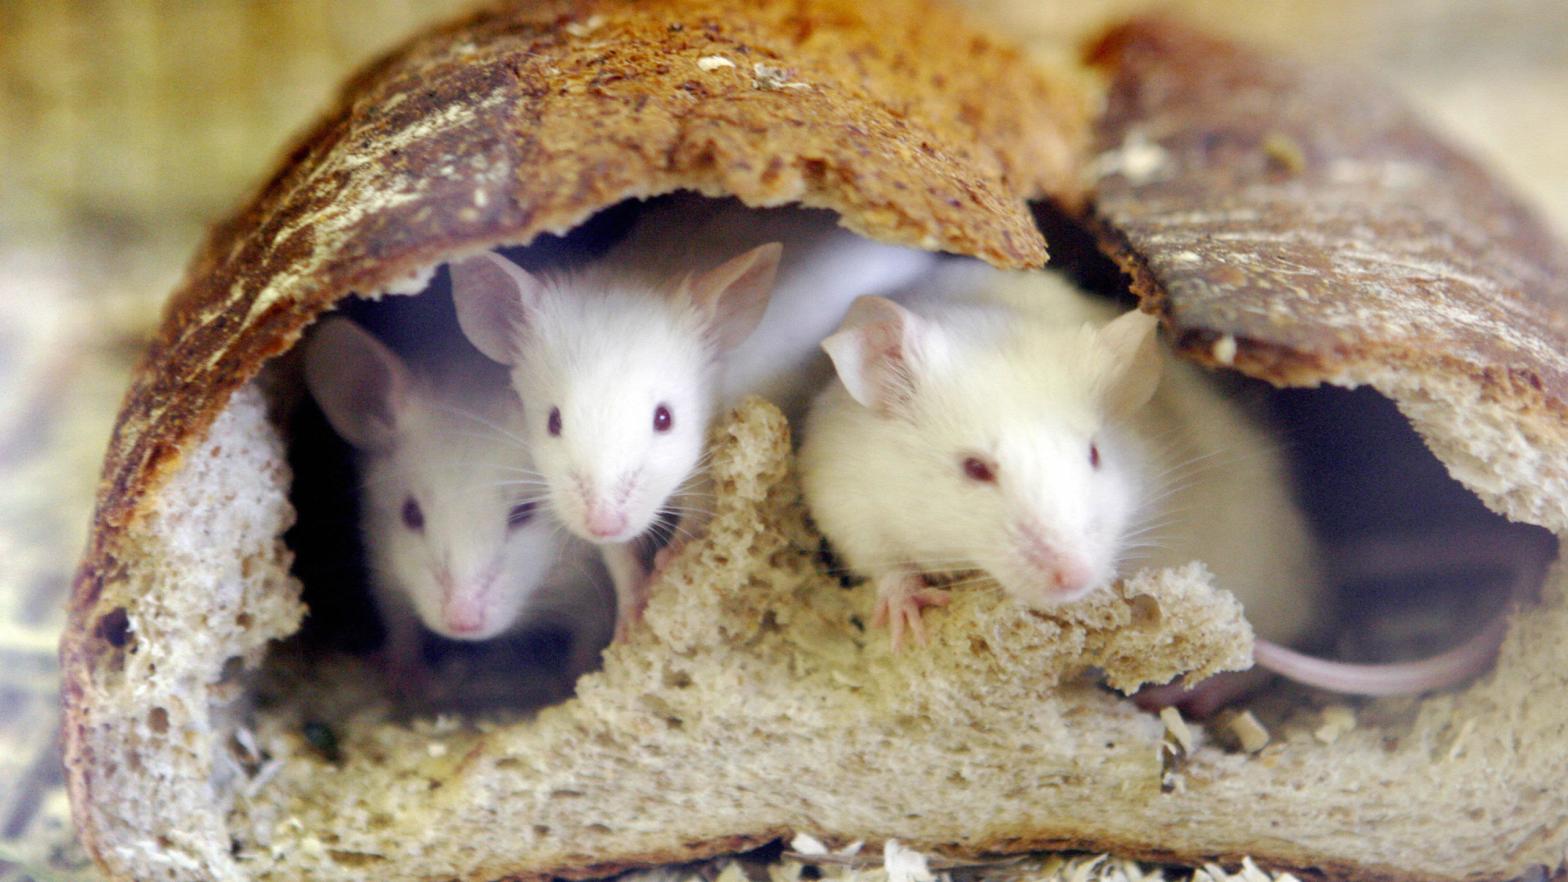 Mice take shelter in a loaf of bread. (Photo: YOSHIKAZU TSUNO/AFP, Getty Images)